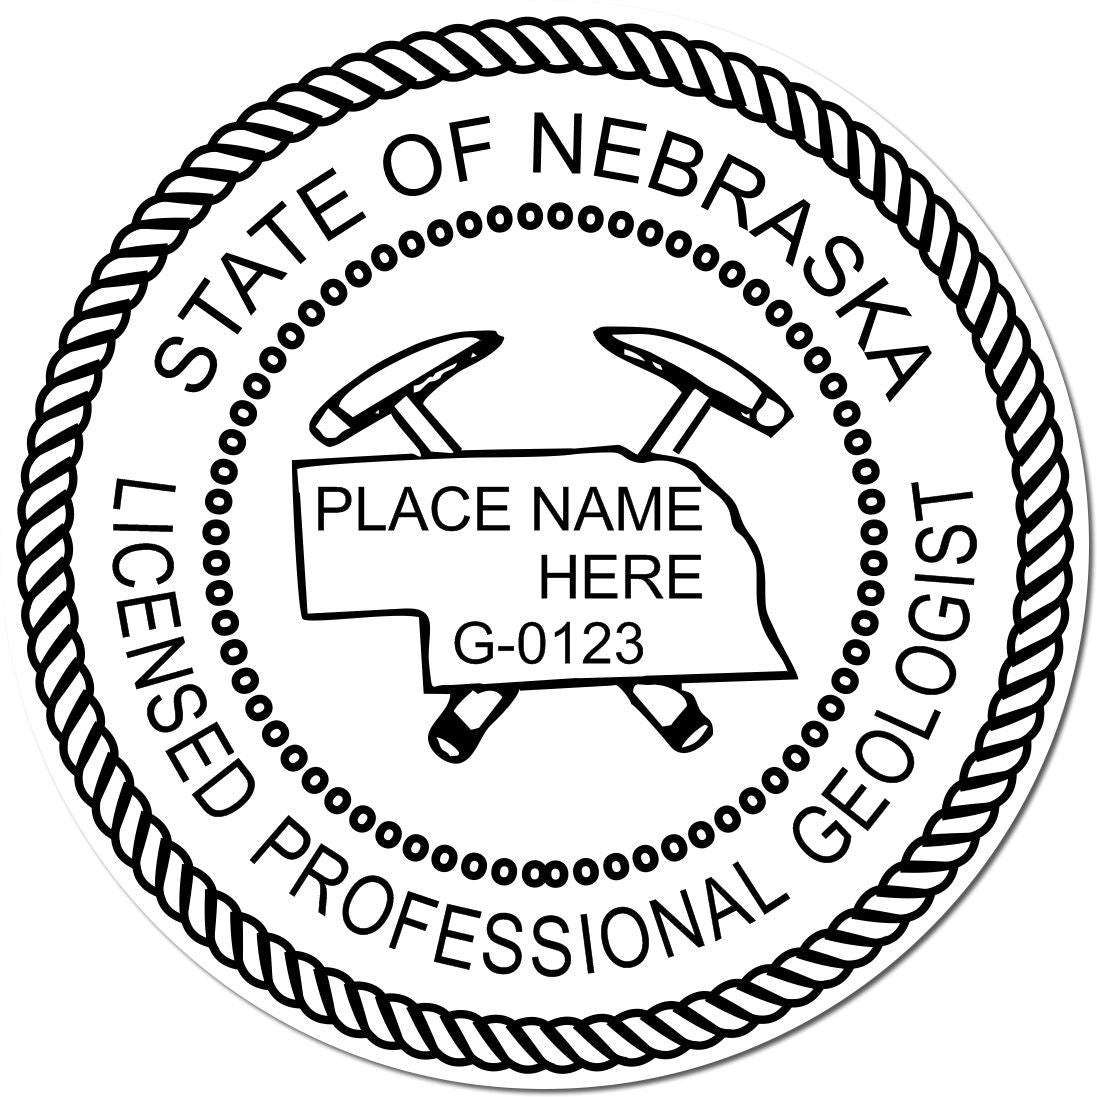 This paper is stamped with a sample imprint of the Digital Nebraska Geologist Stamp, Electronic Seal for Nebraska Geologist, signifying its quality and reliability.